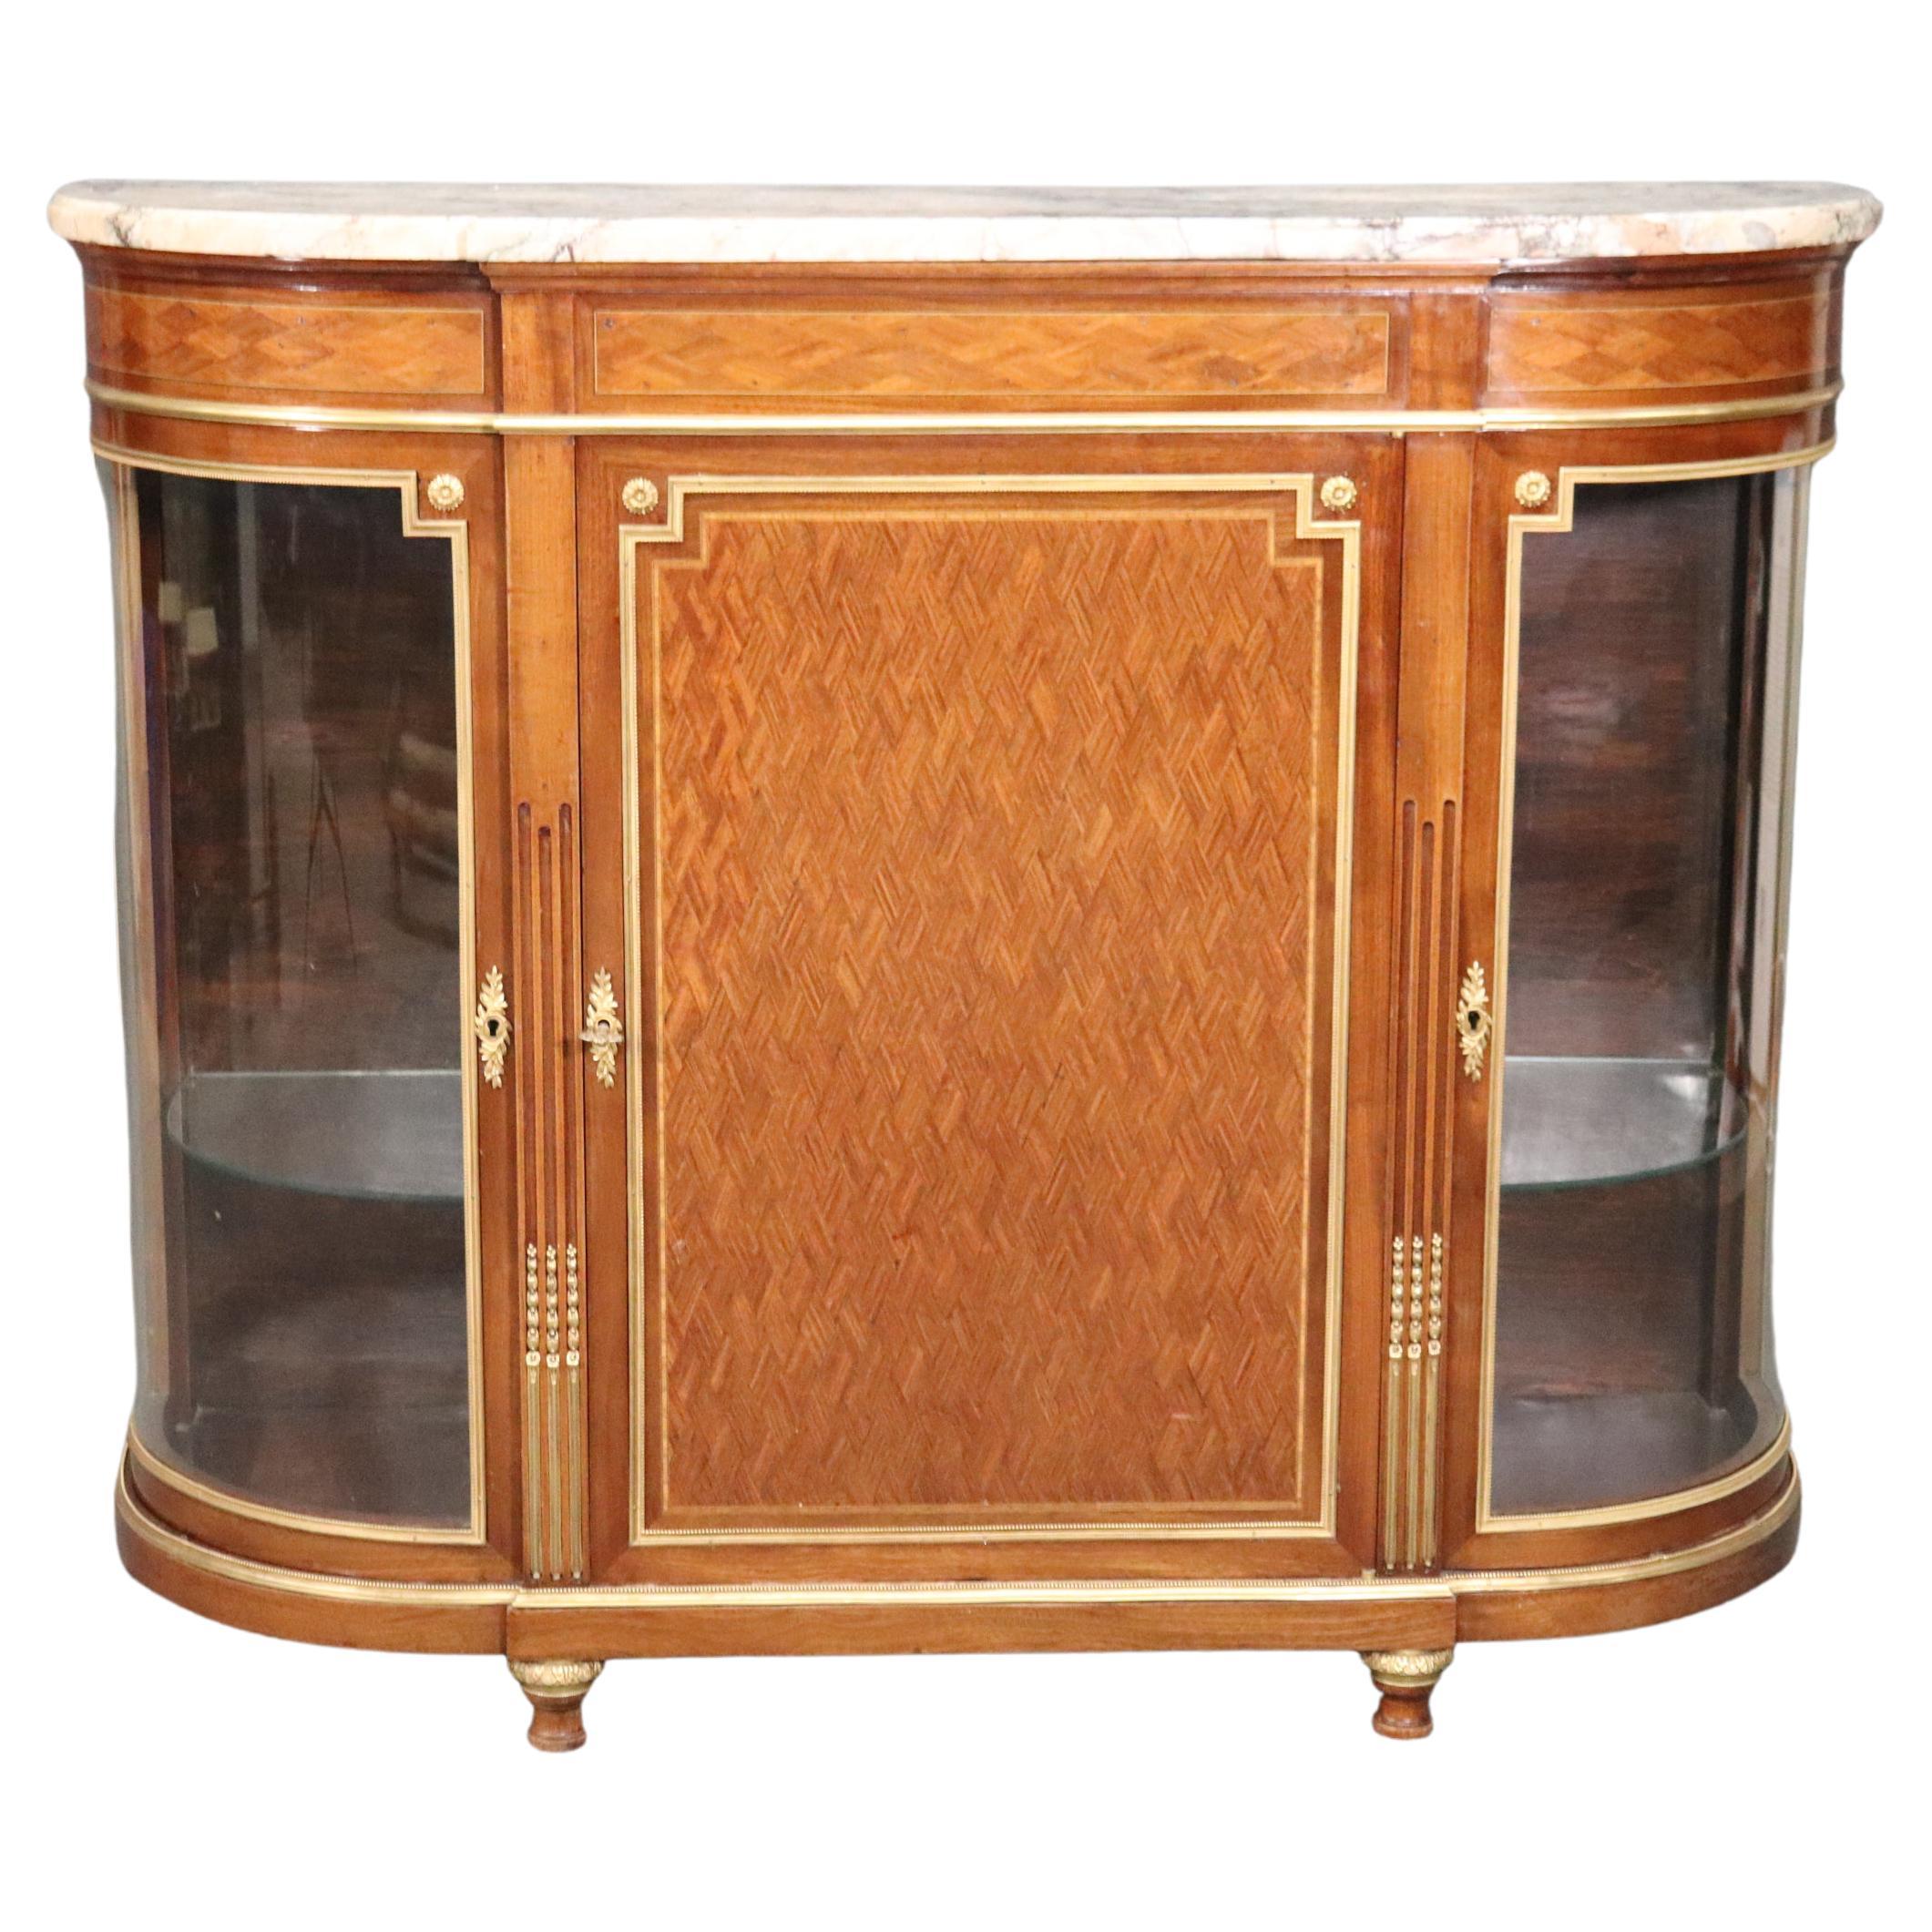 Superb French Louis XVI Kingwood Marquetry Marble Top Sideboard Buffet Server